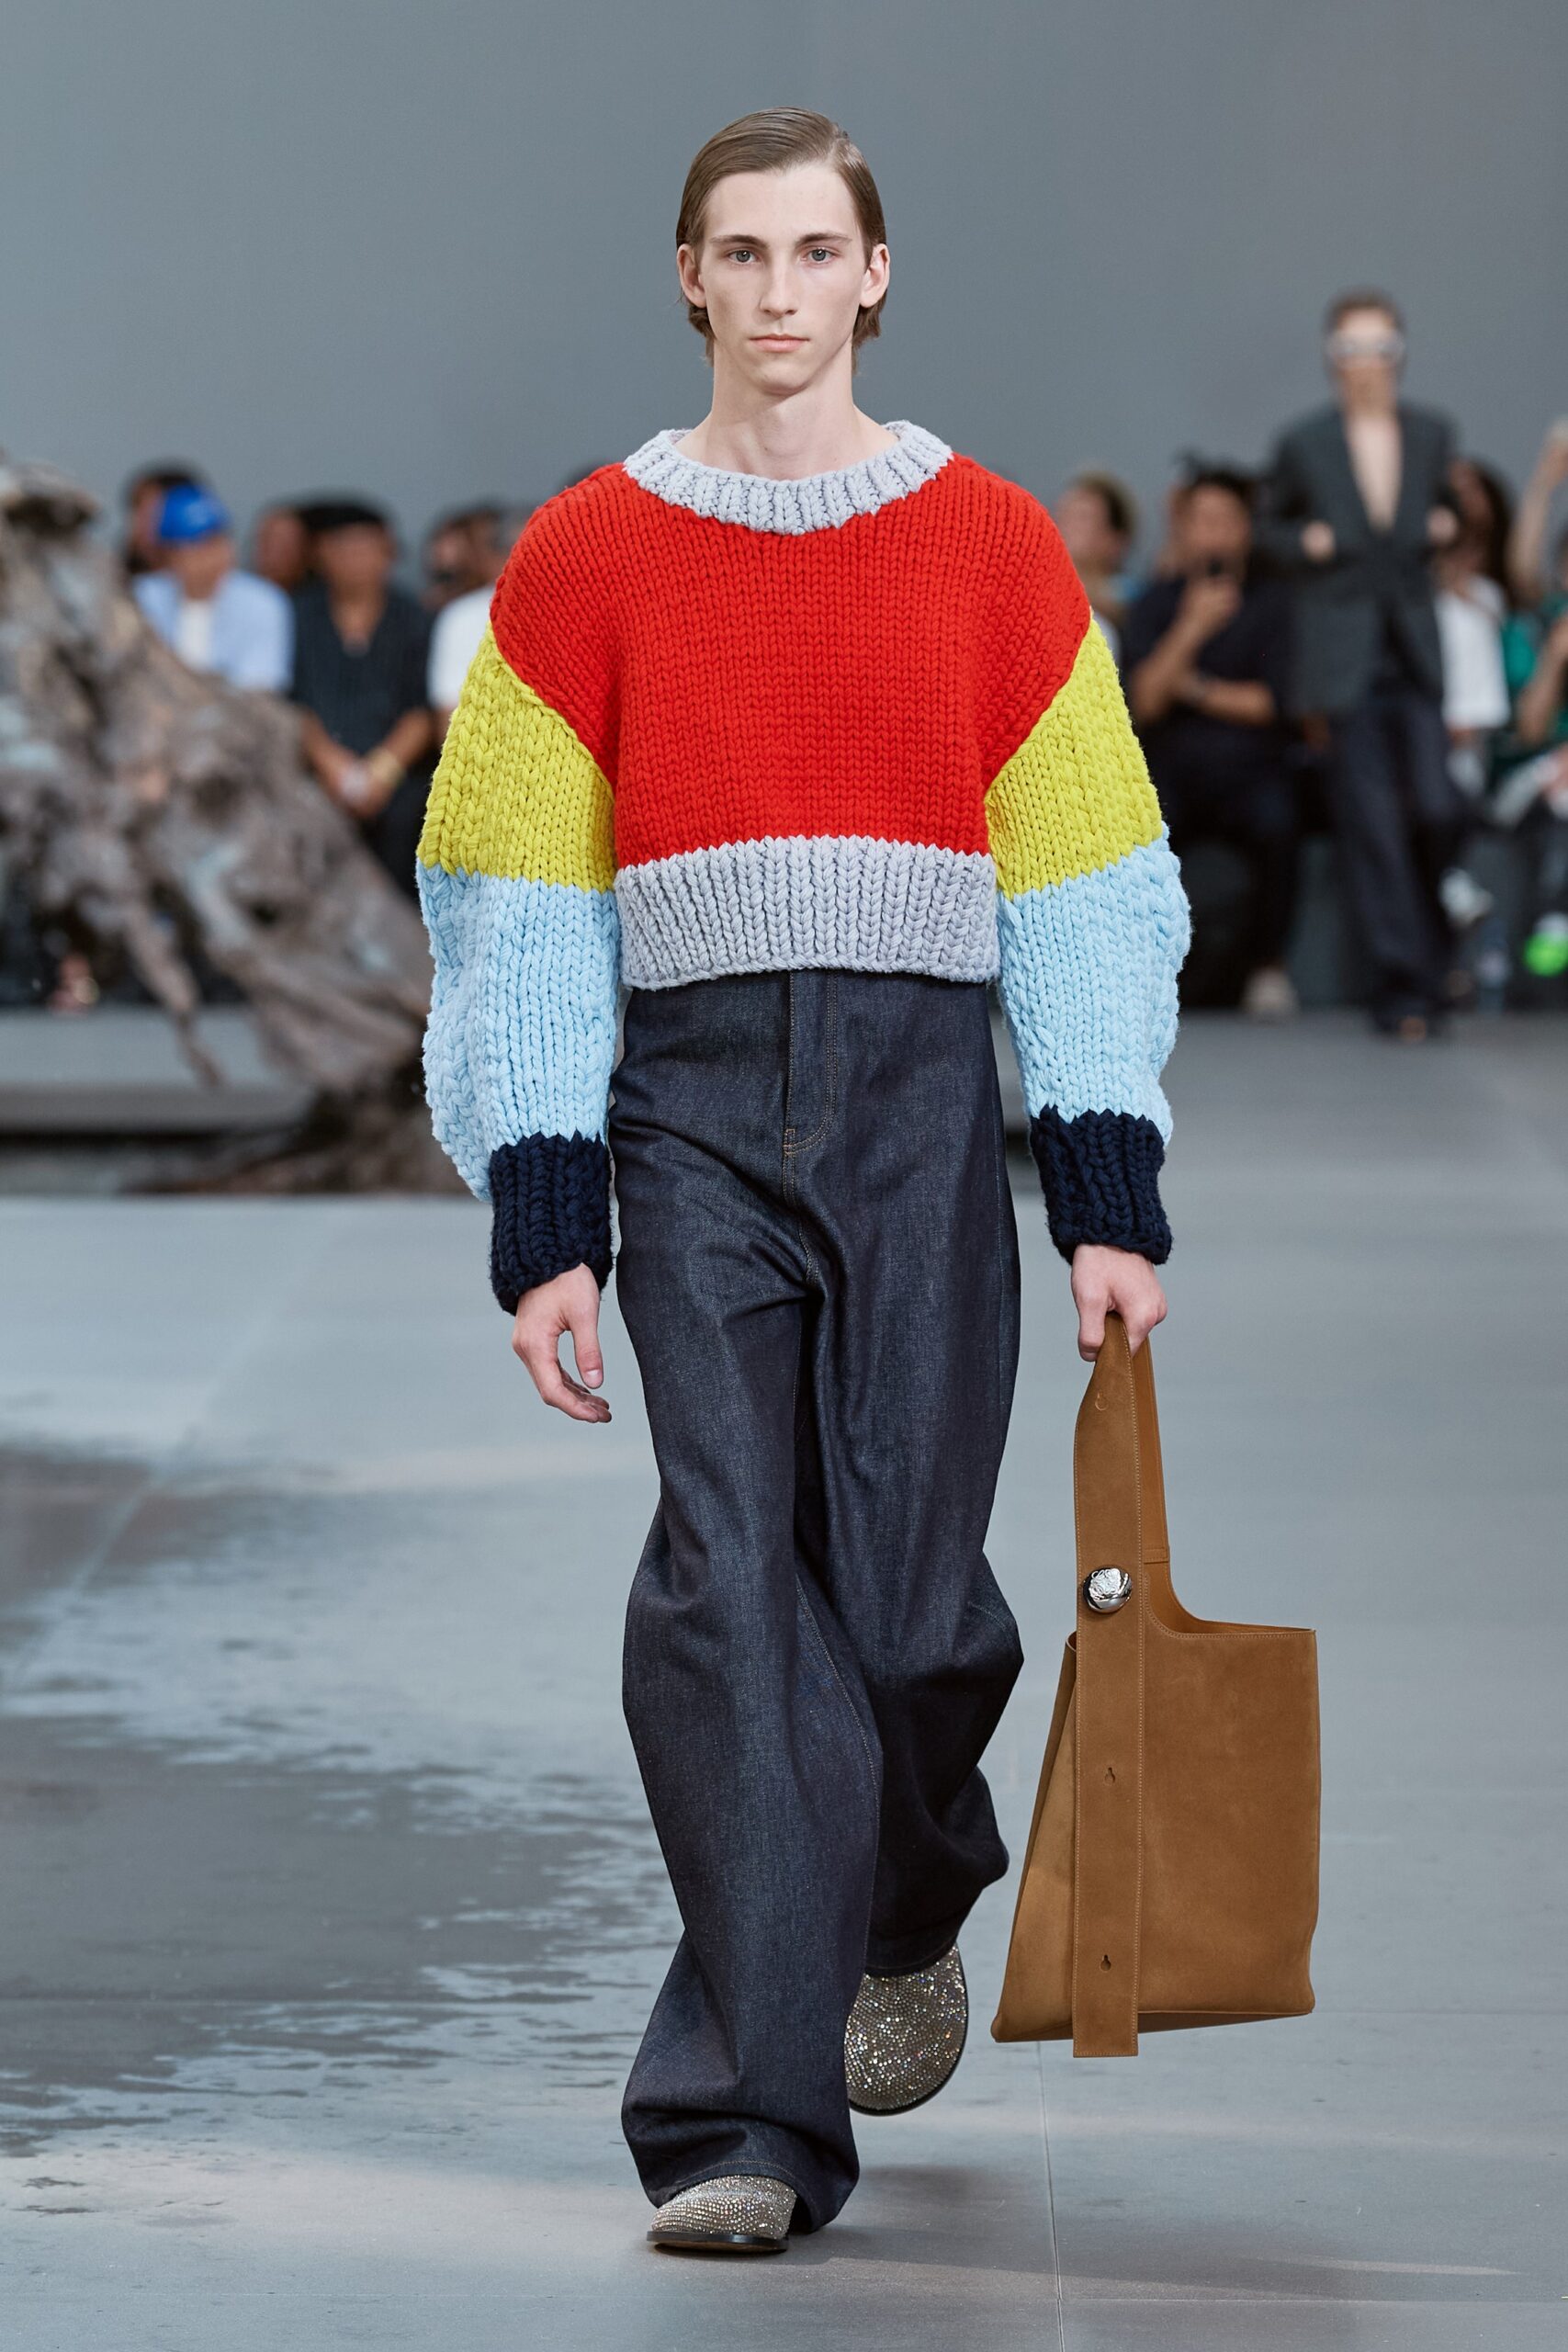 Jonathan Anderson on his AW20 Loewe collection at Paris Fashion